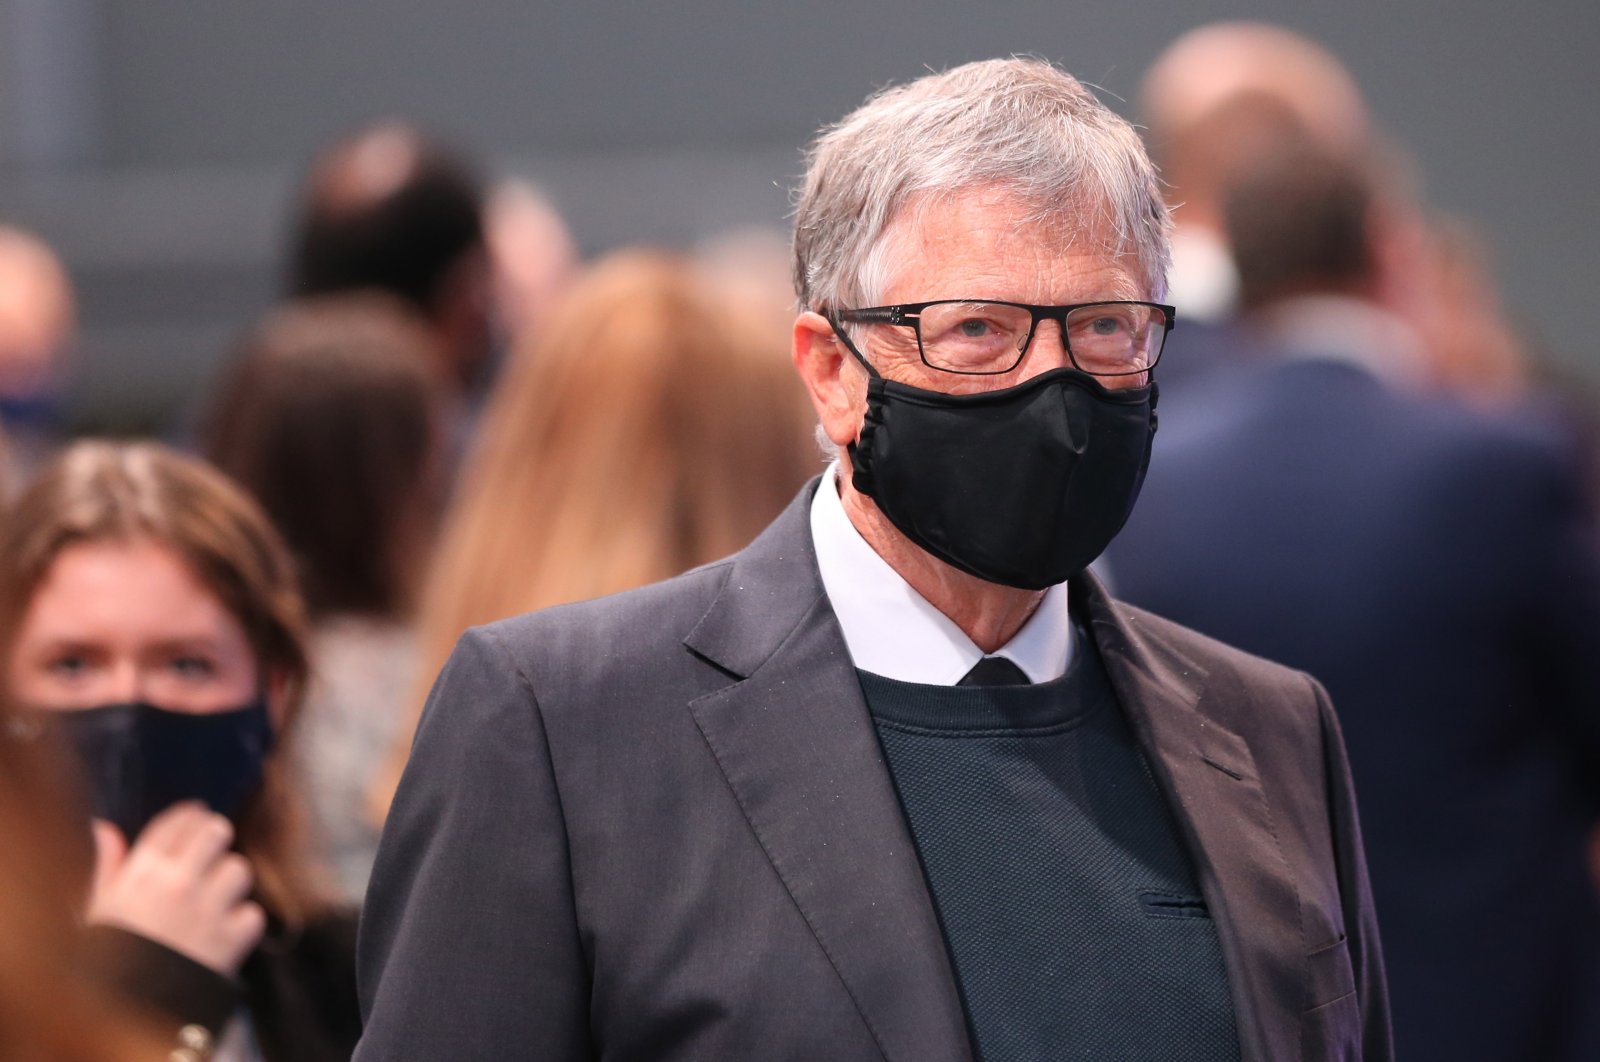 United States businessperson Bill Gates attends the United Nations Climate Change Conference (COP26) in Glasgow, Britain, Nov. 2, 2021.  (EPA Photo)